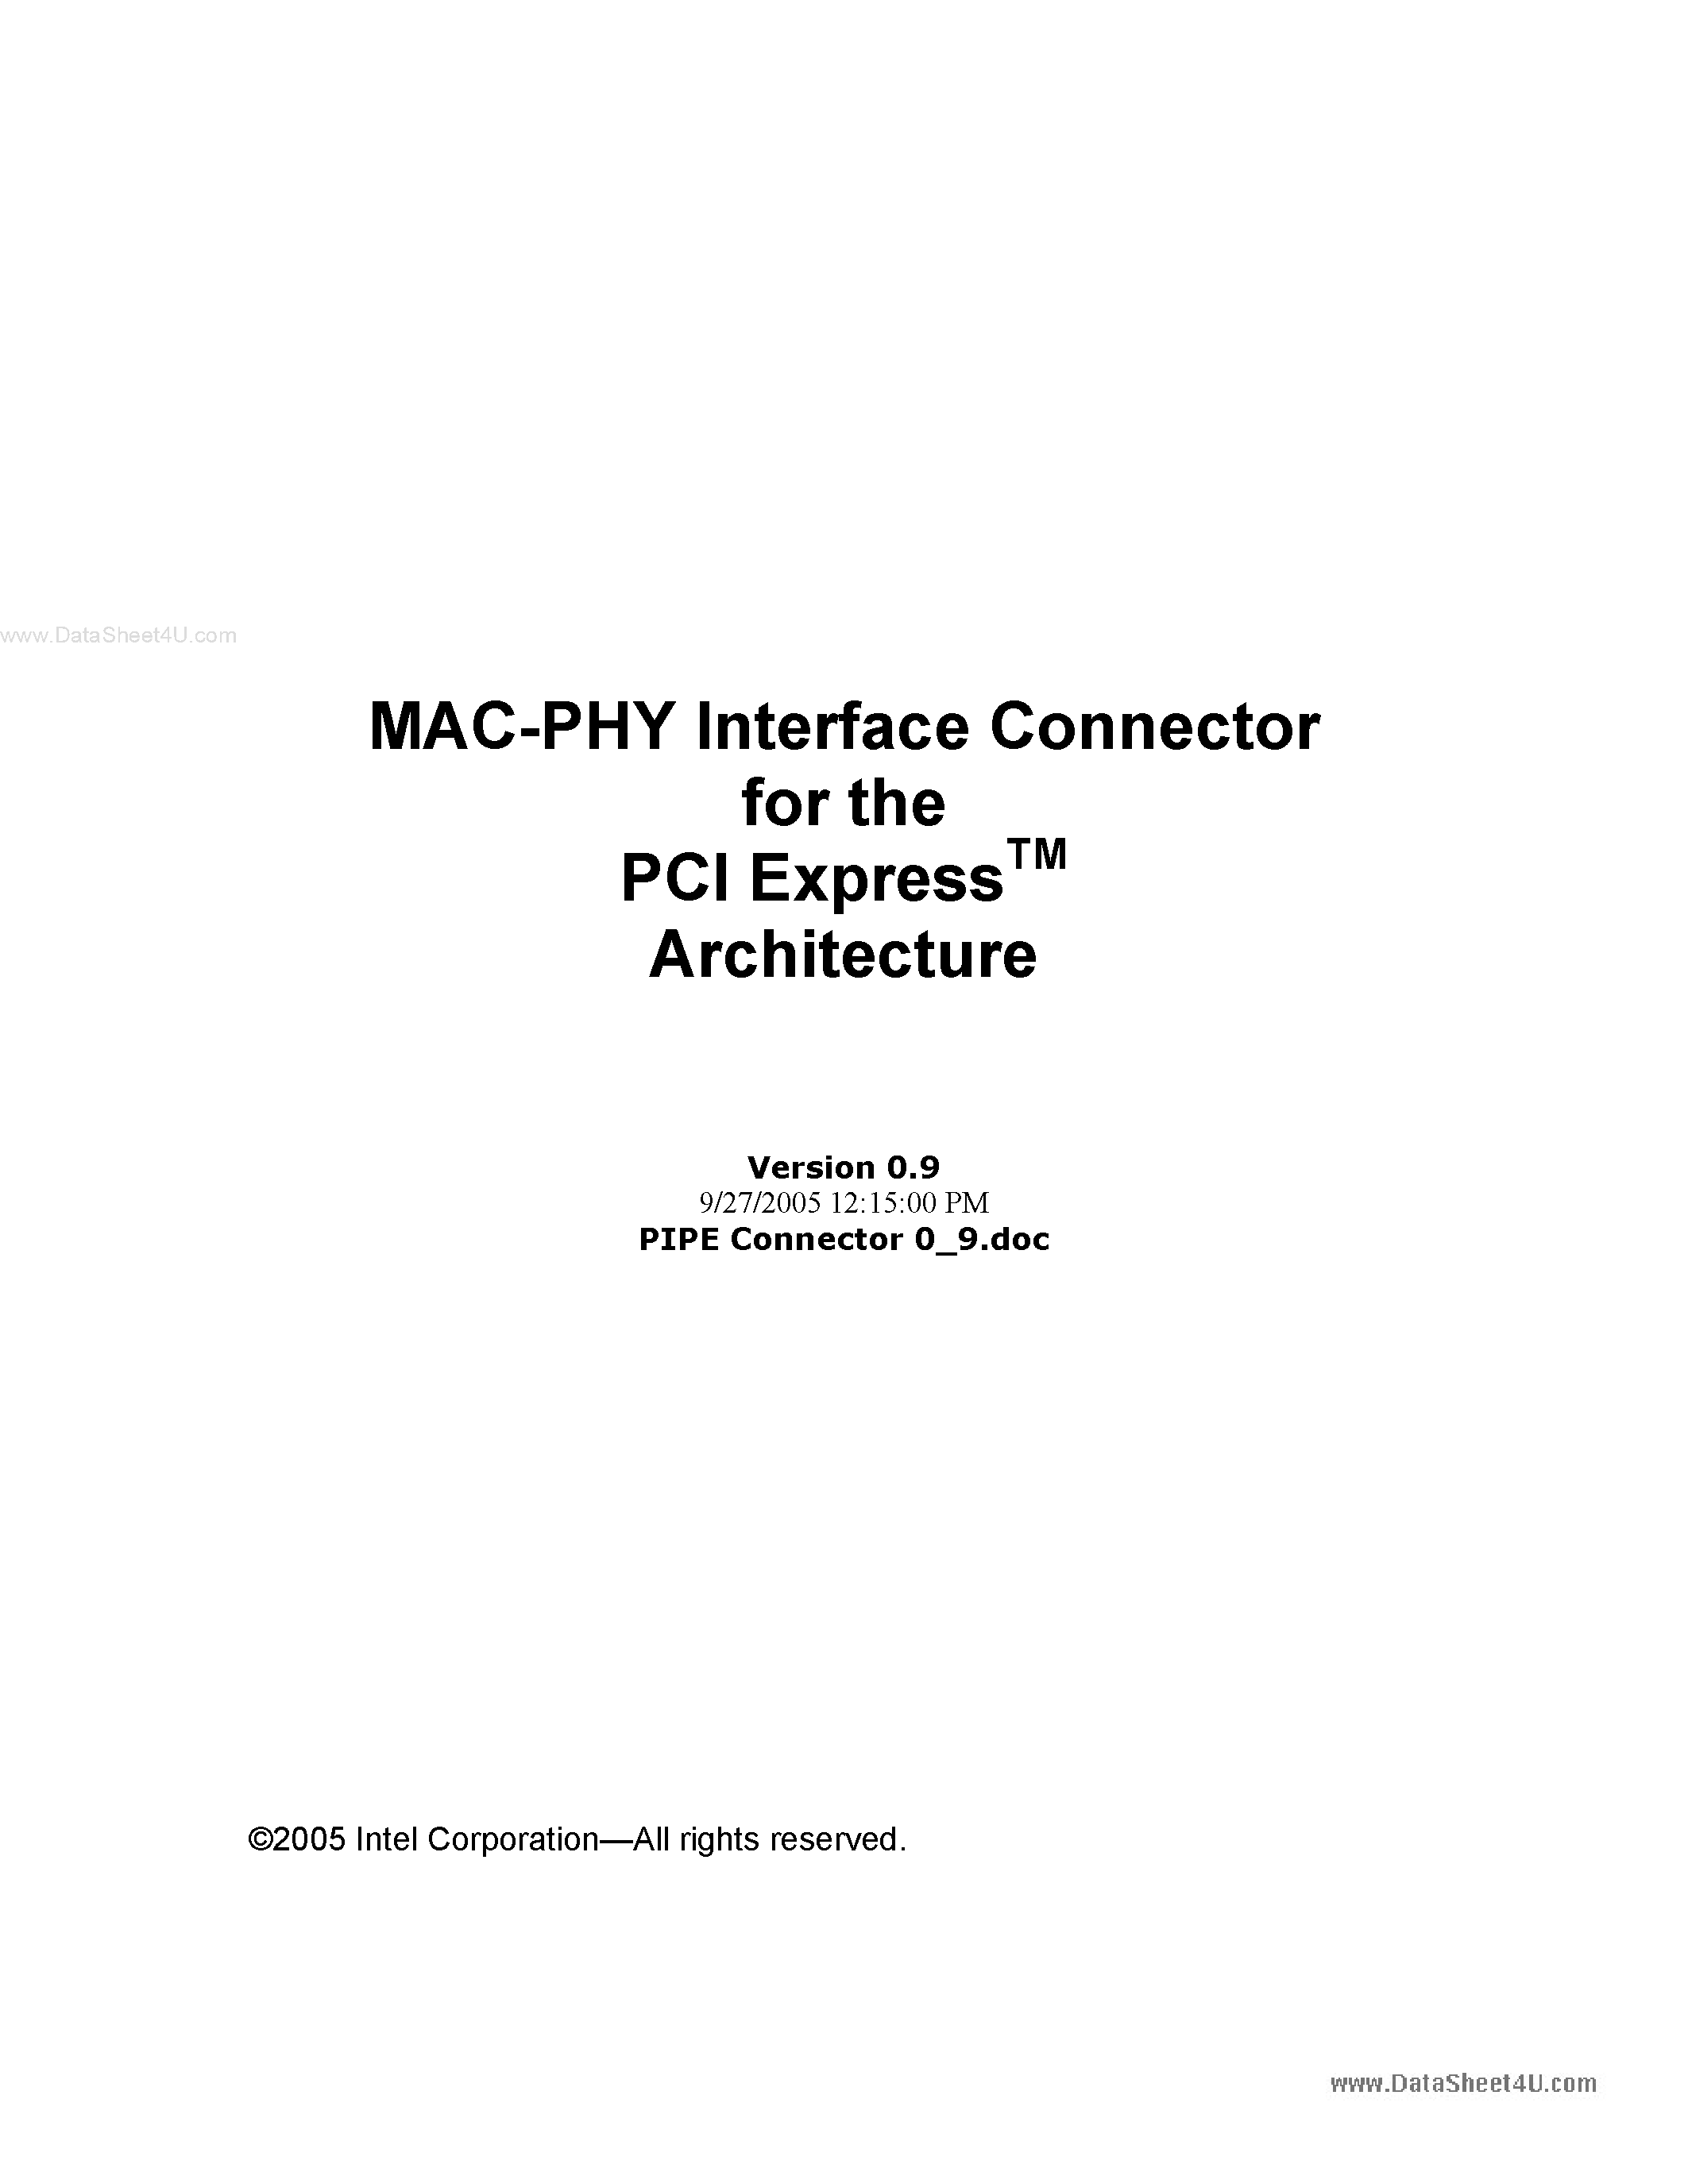 Datasheet QSE-060-01-F-D-A - MAC-PHY Interface Connector page 1